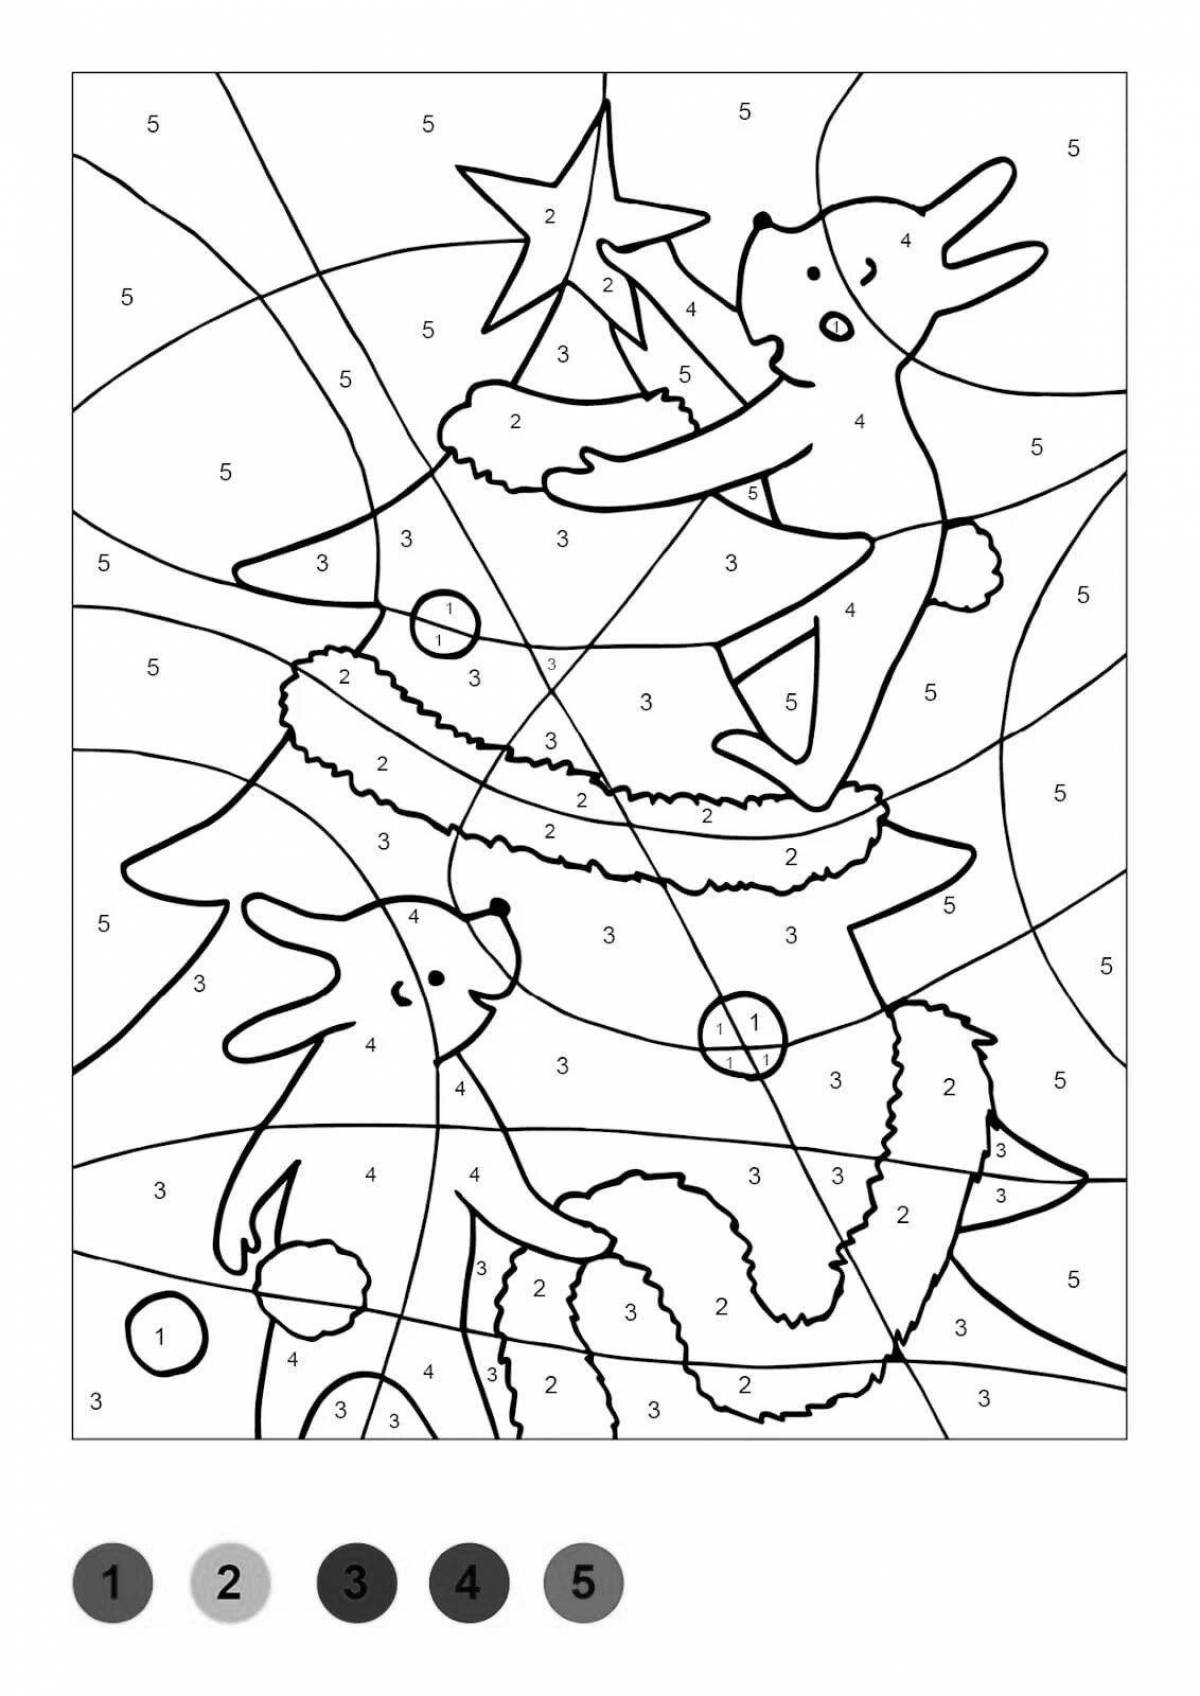 Live winter coloring by numbers